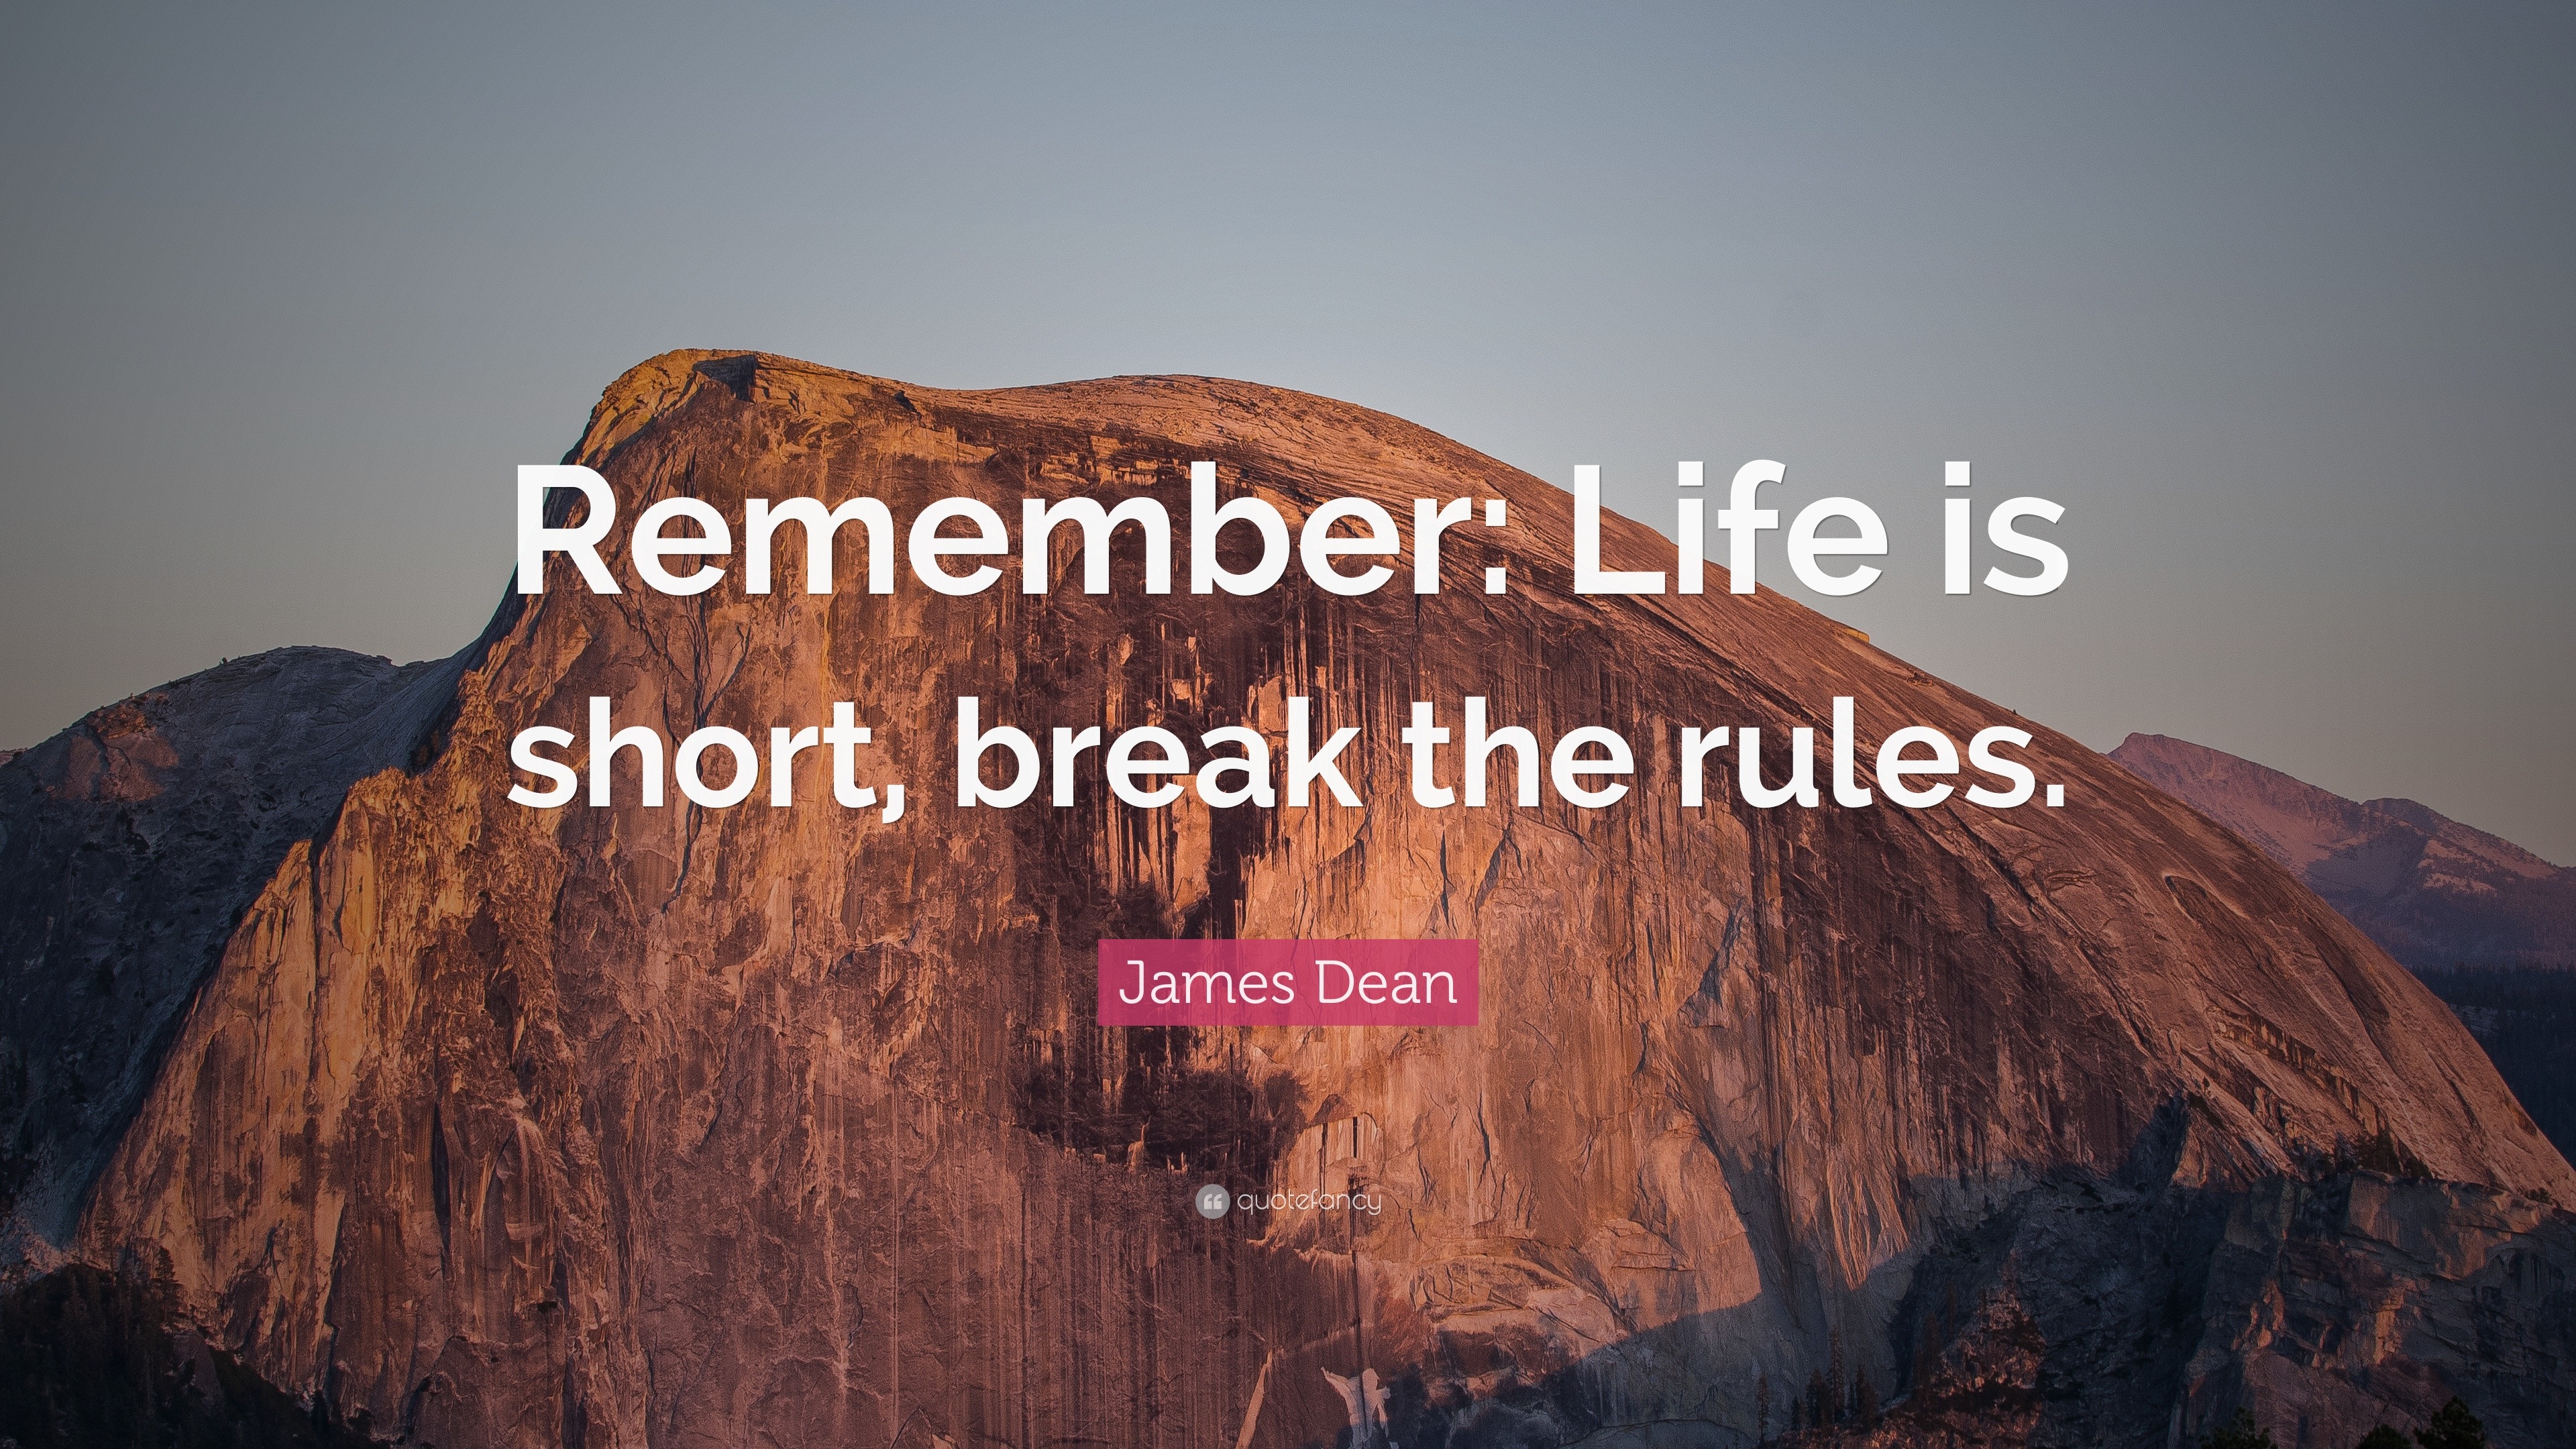 James Dean Quote: “Remember: Life is short, break the rules.”